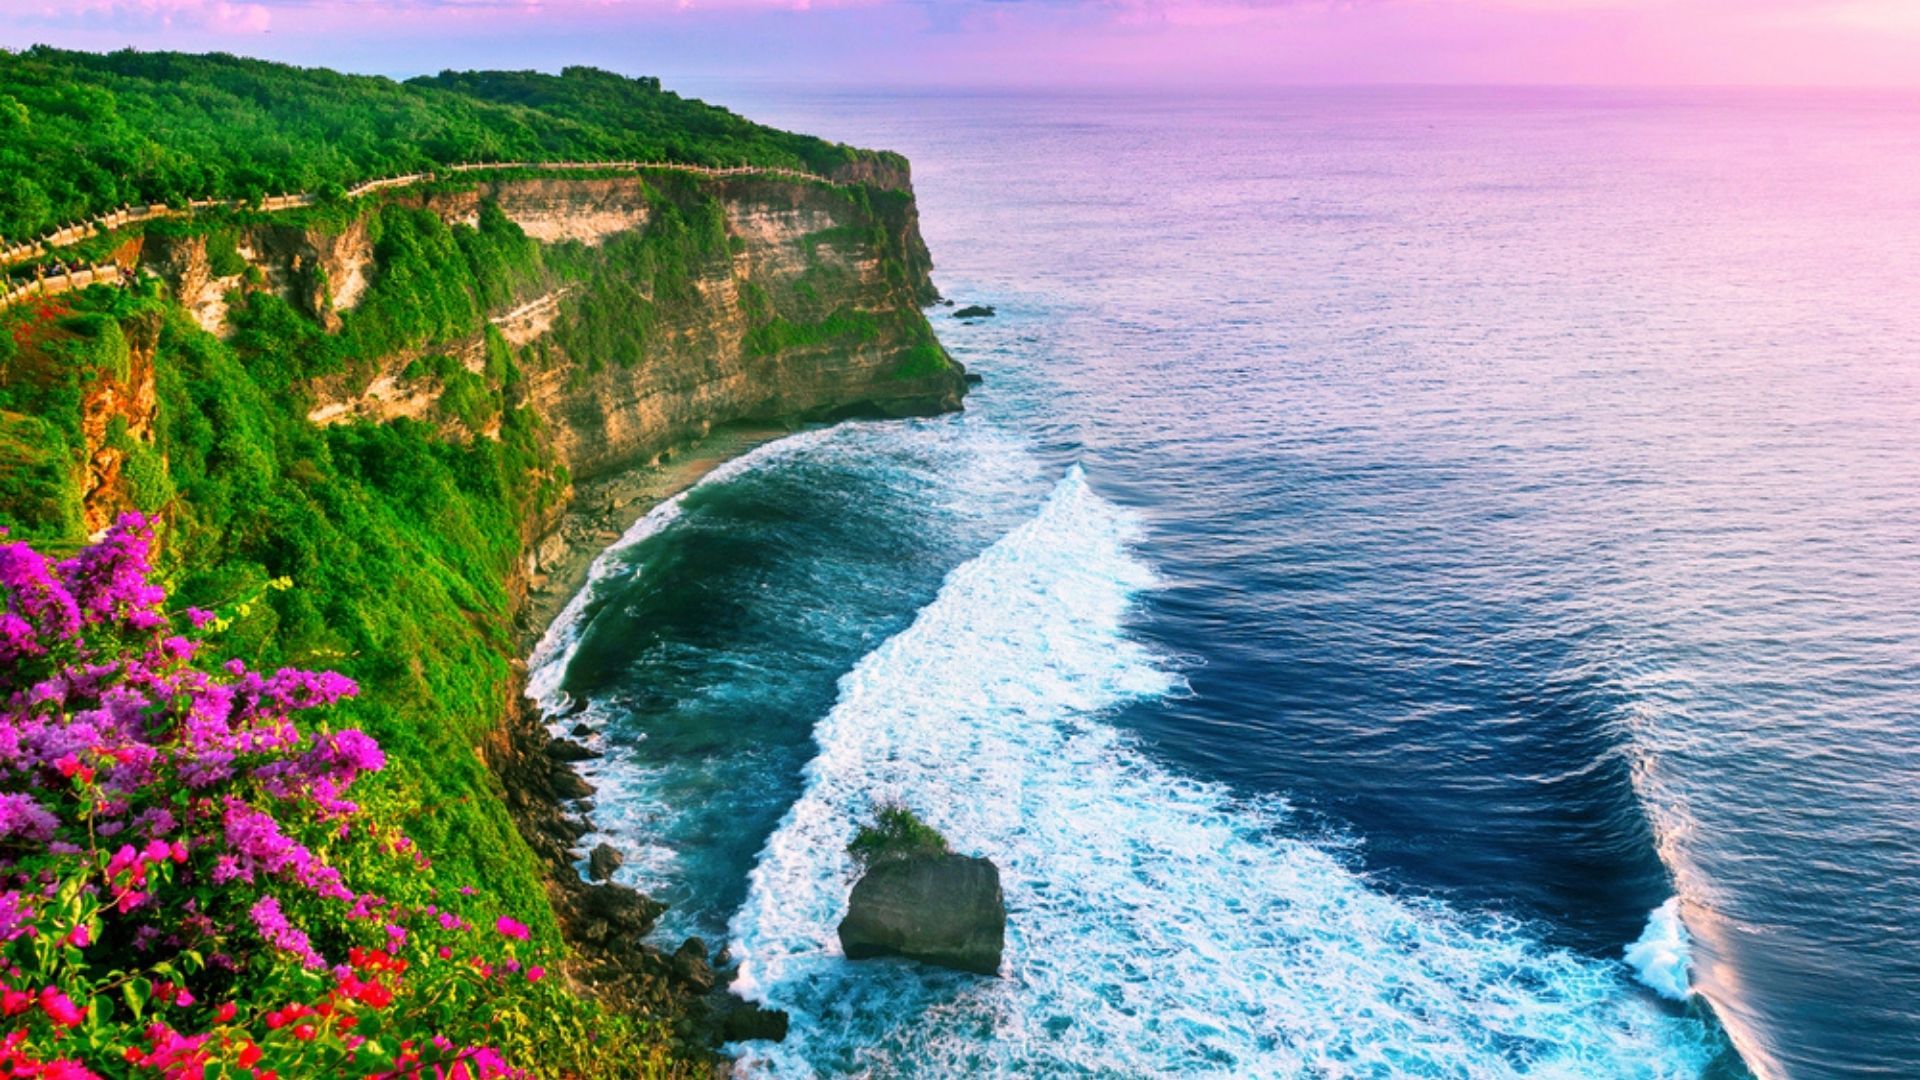 Top places to visit in Bali